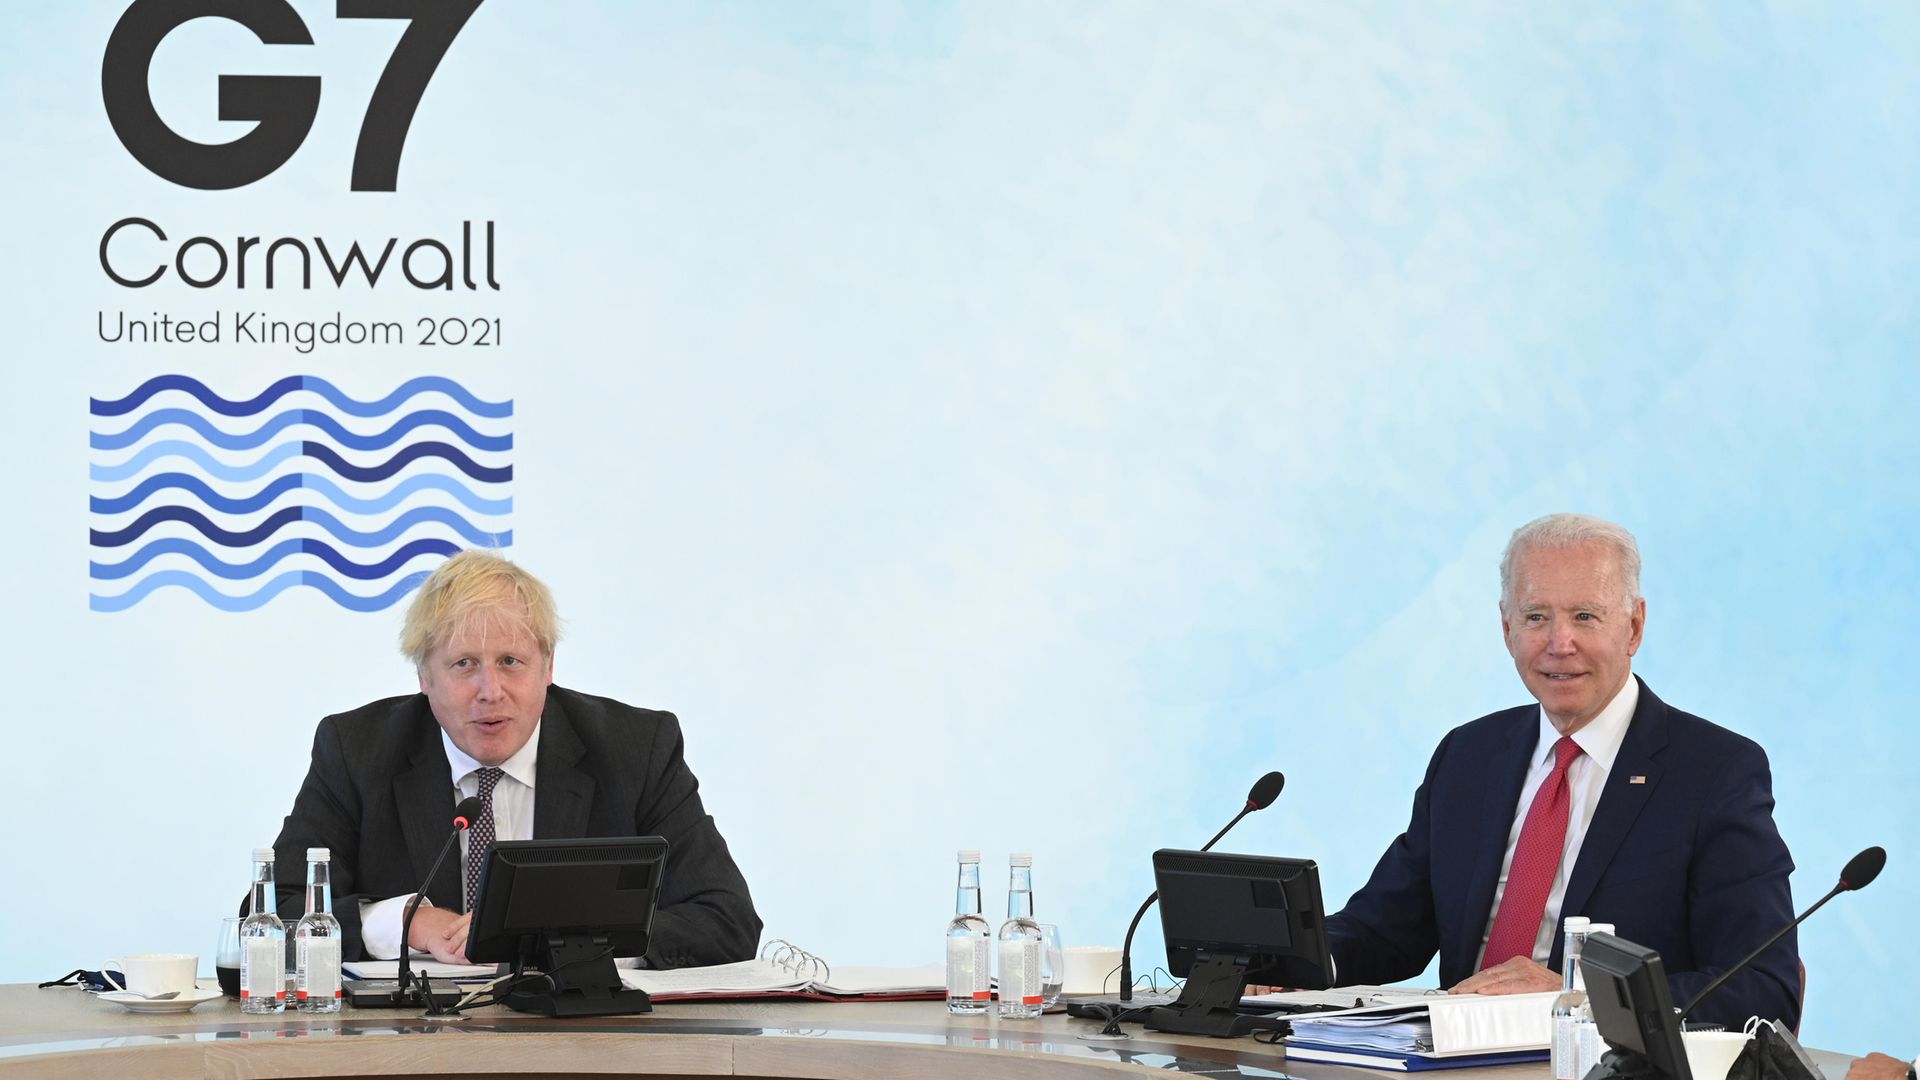 Prime Minister Boris Johnson (left) next to US President Joe Biden in Carbis Bay, during the G7 summit in Cornwall - Credit: PA